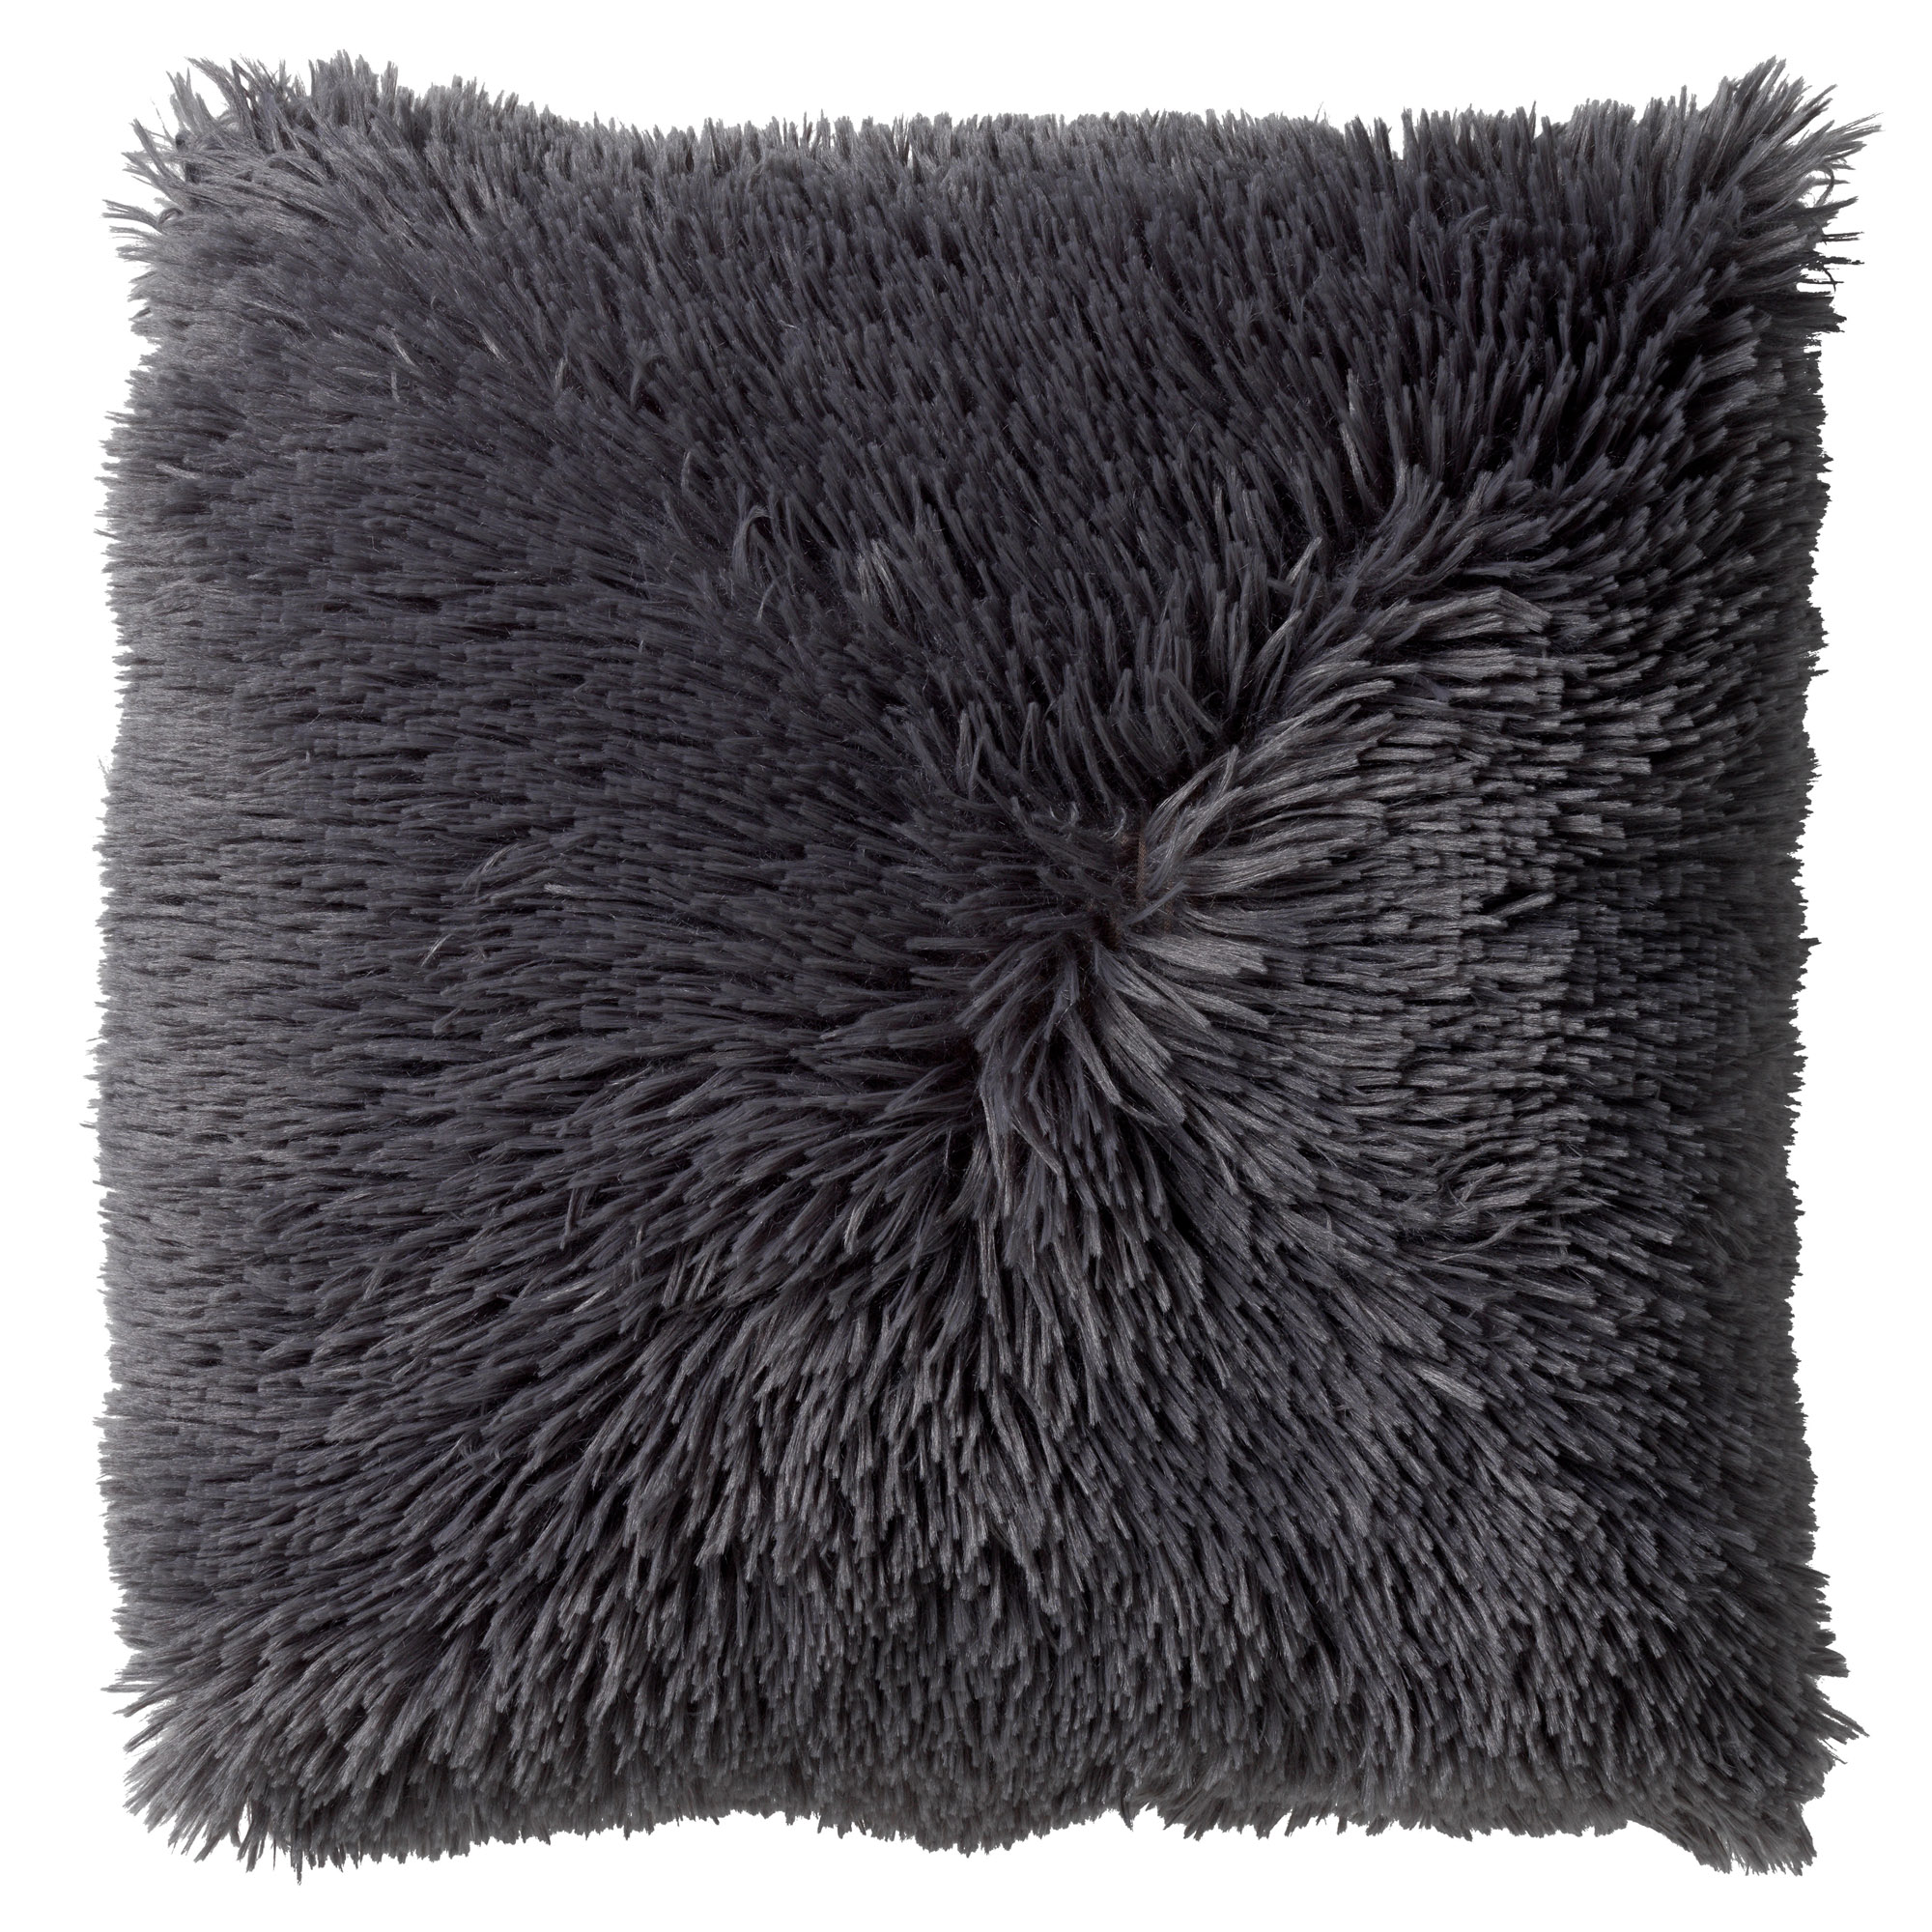 FLUFFY - Cushion 60x60 cm - Charcoal Gray - anthracite